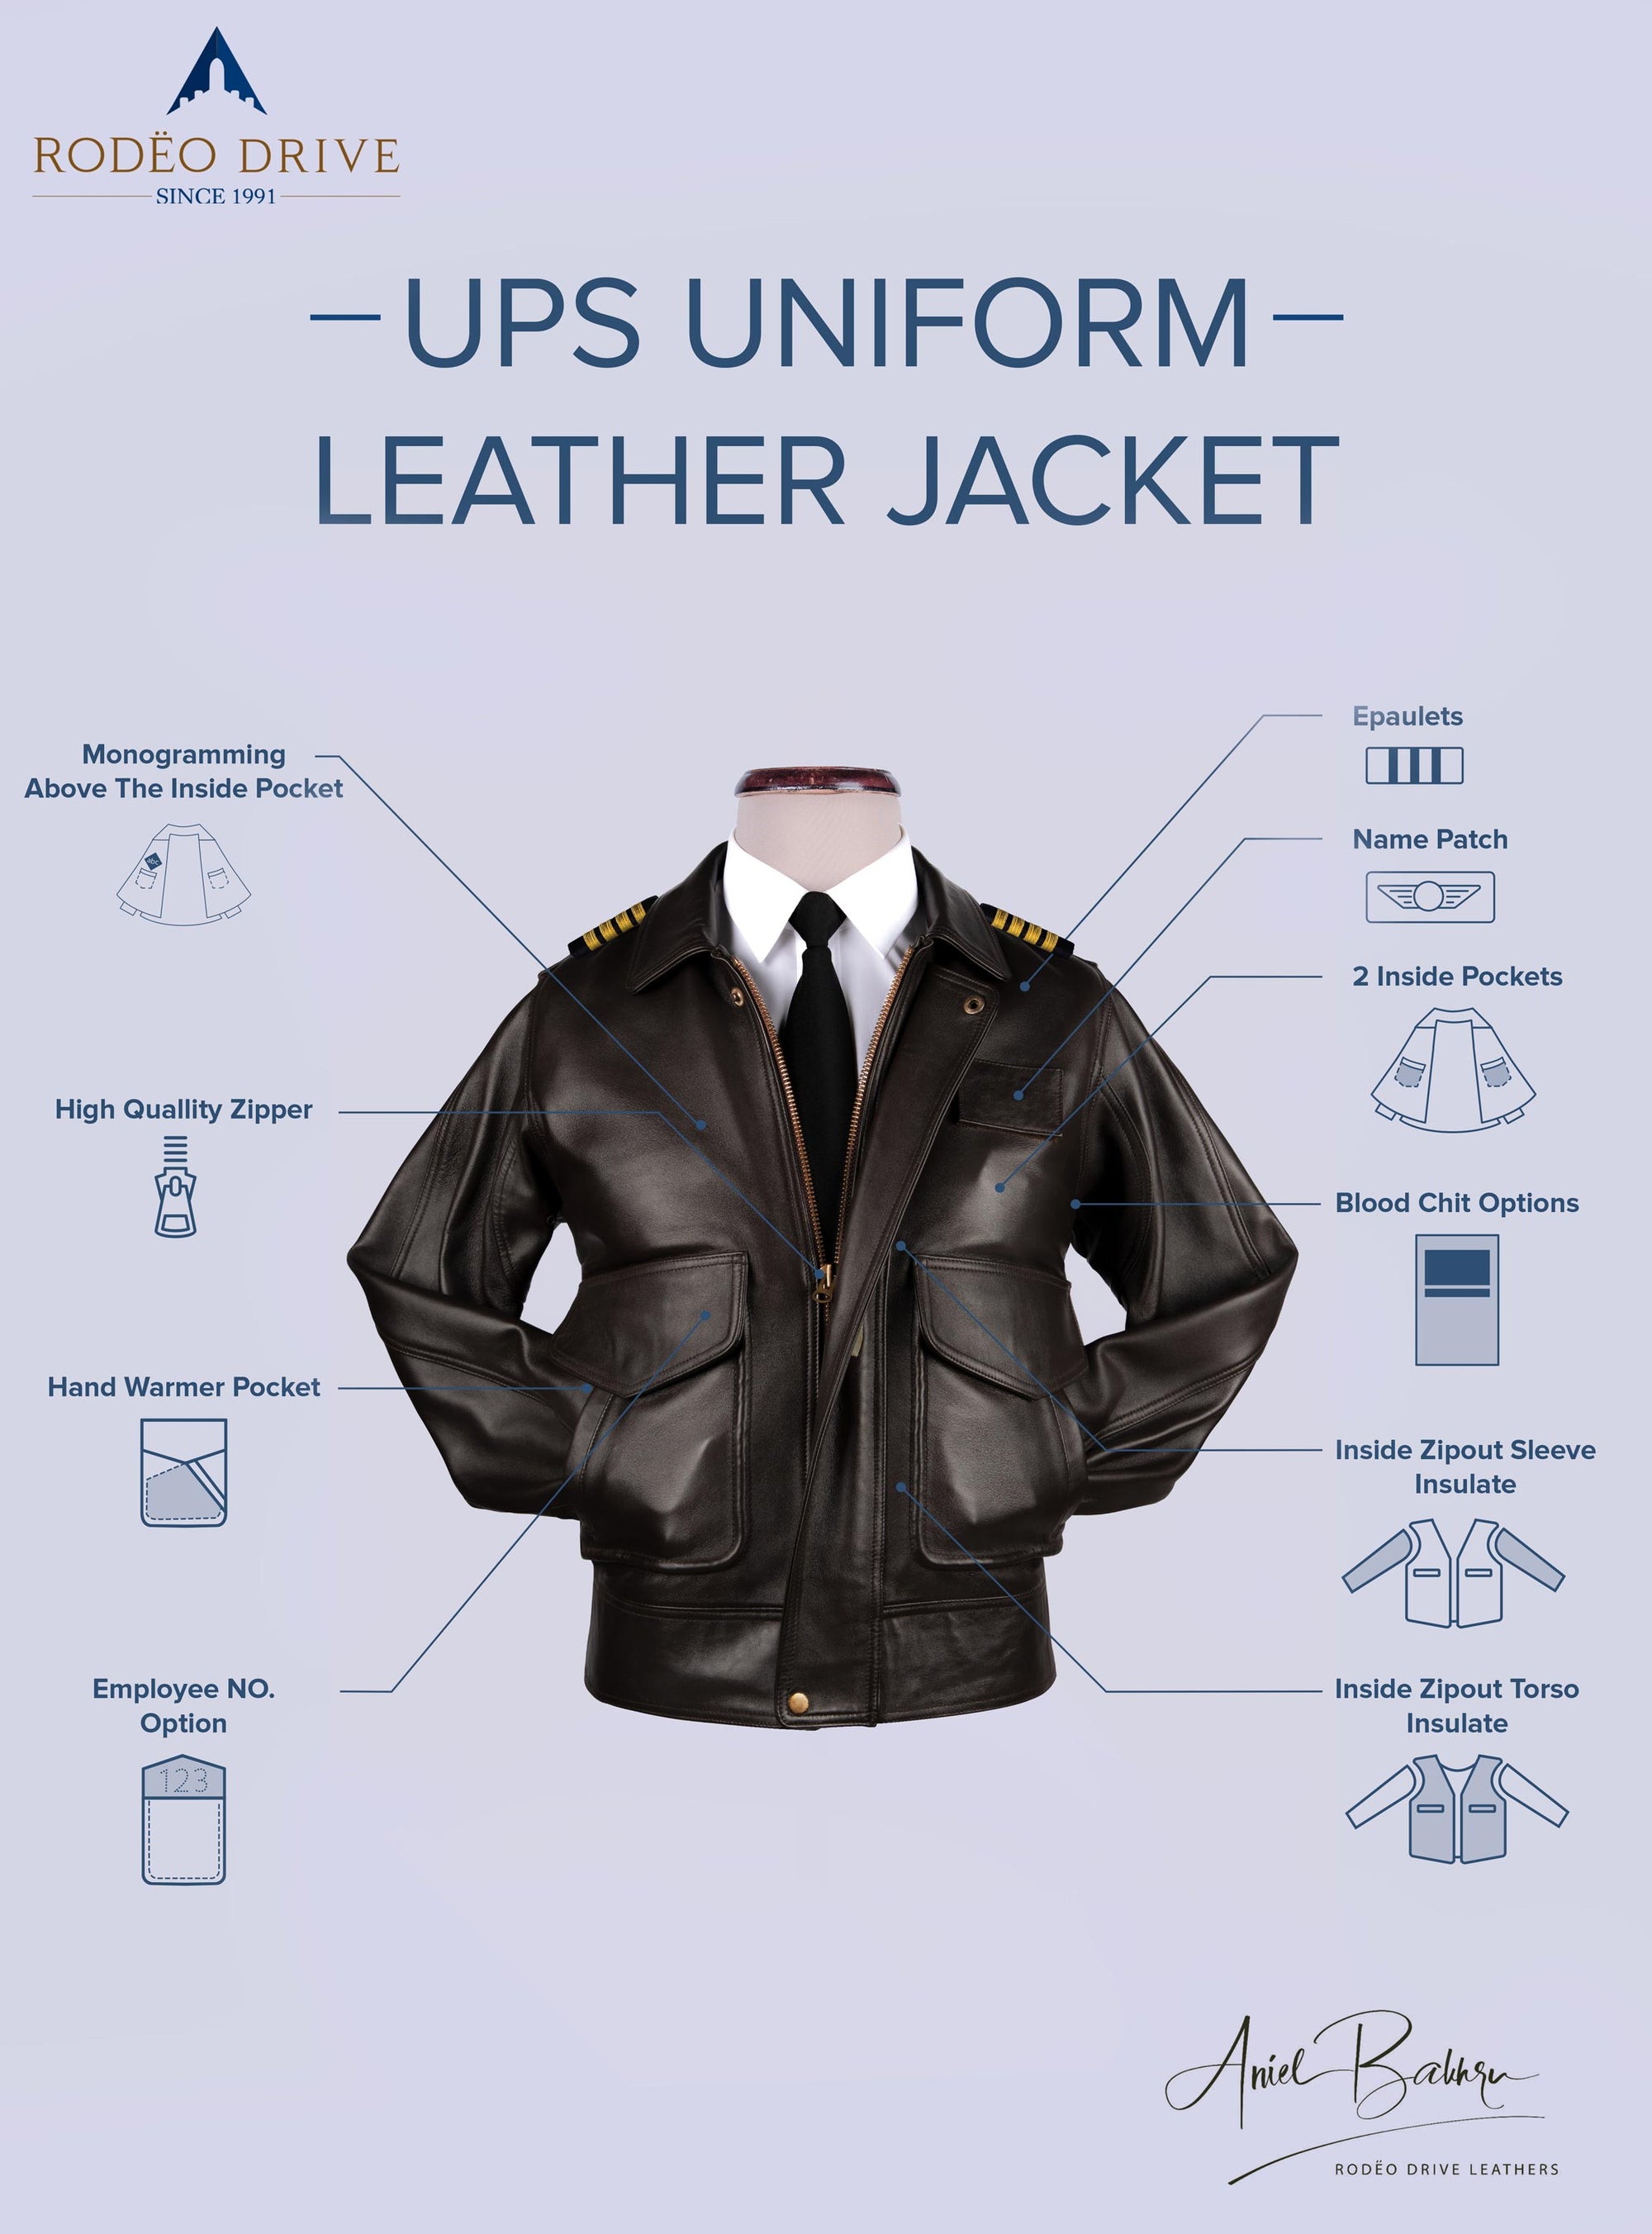 Anatomy of UPS BROWN UNIFORM LEATHER JACKETS MEN. Different parts are nicely explained.